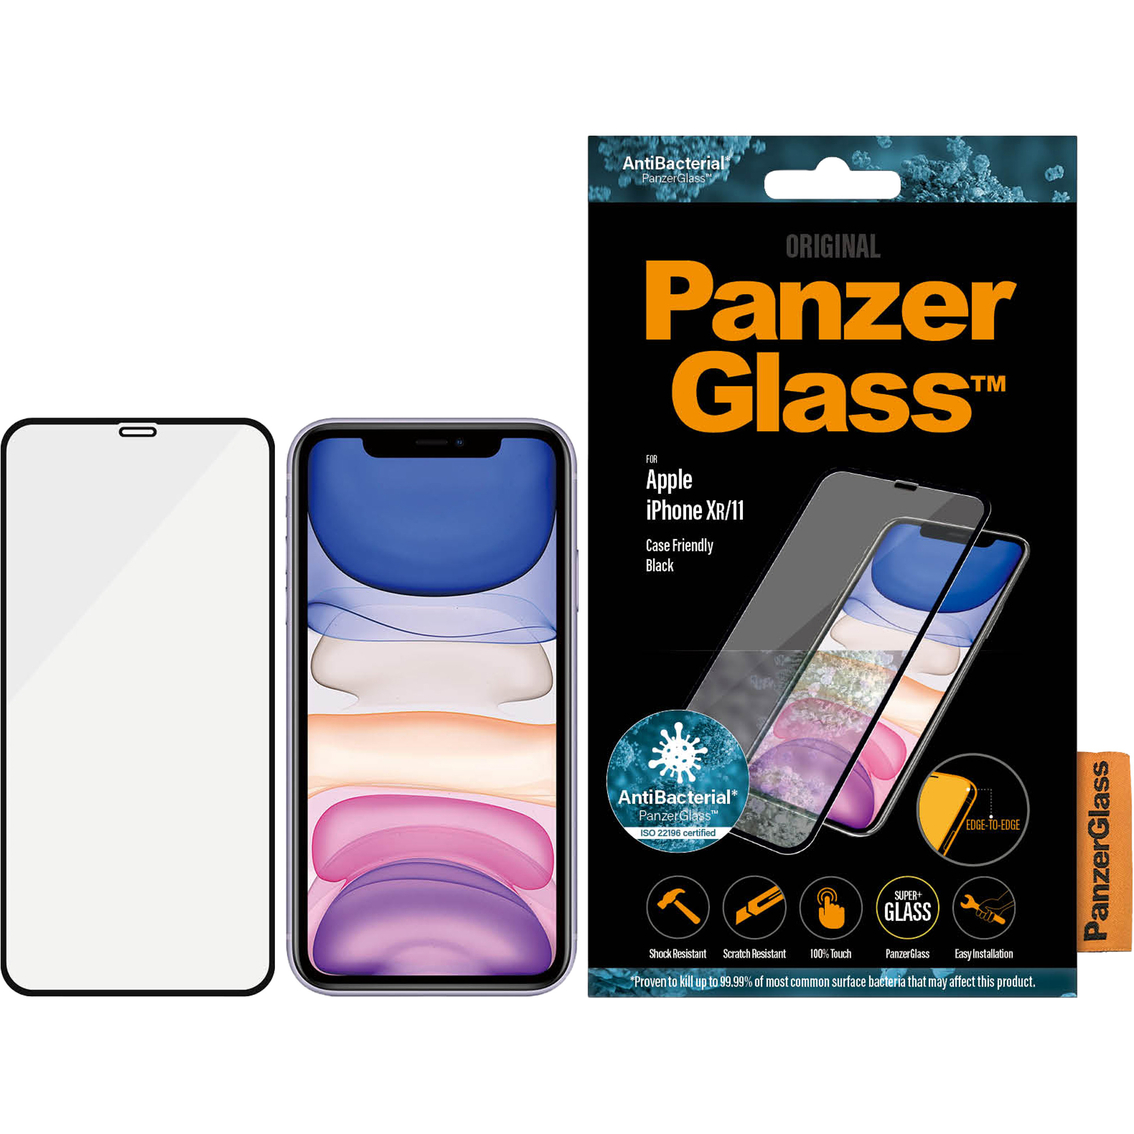 Panzer Glass Screen Protector for iPhone Xr and iPhone 11 - Image 2 of 6